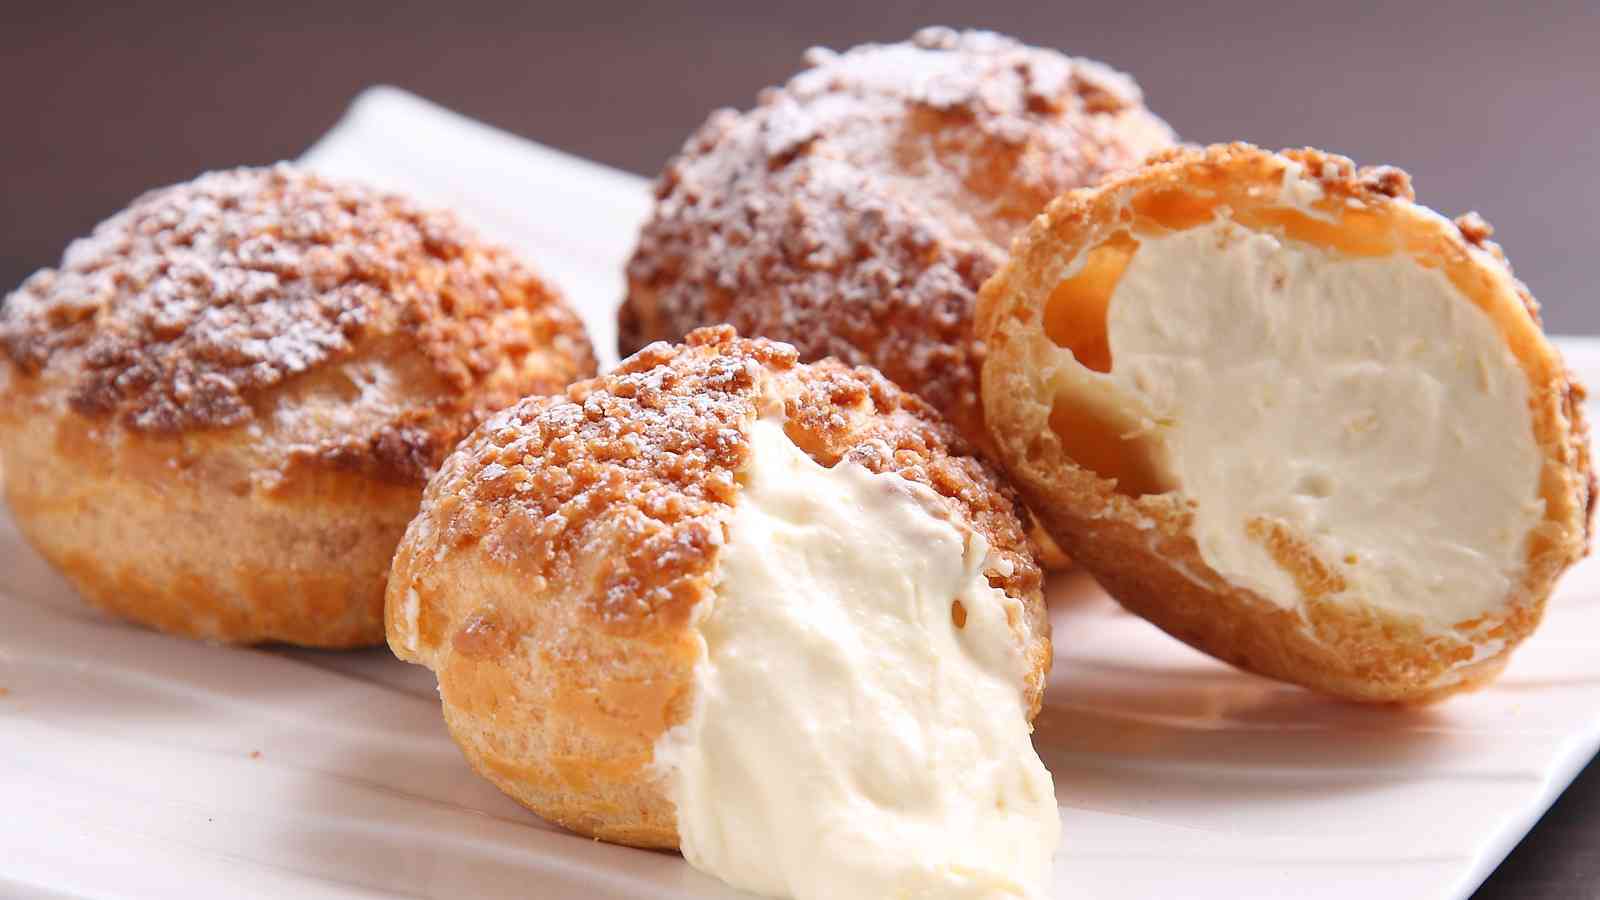 National Cream Puff Day 2023: Date, Recipes, and history of cream puffs